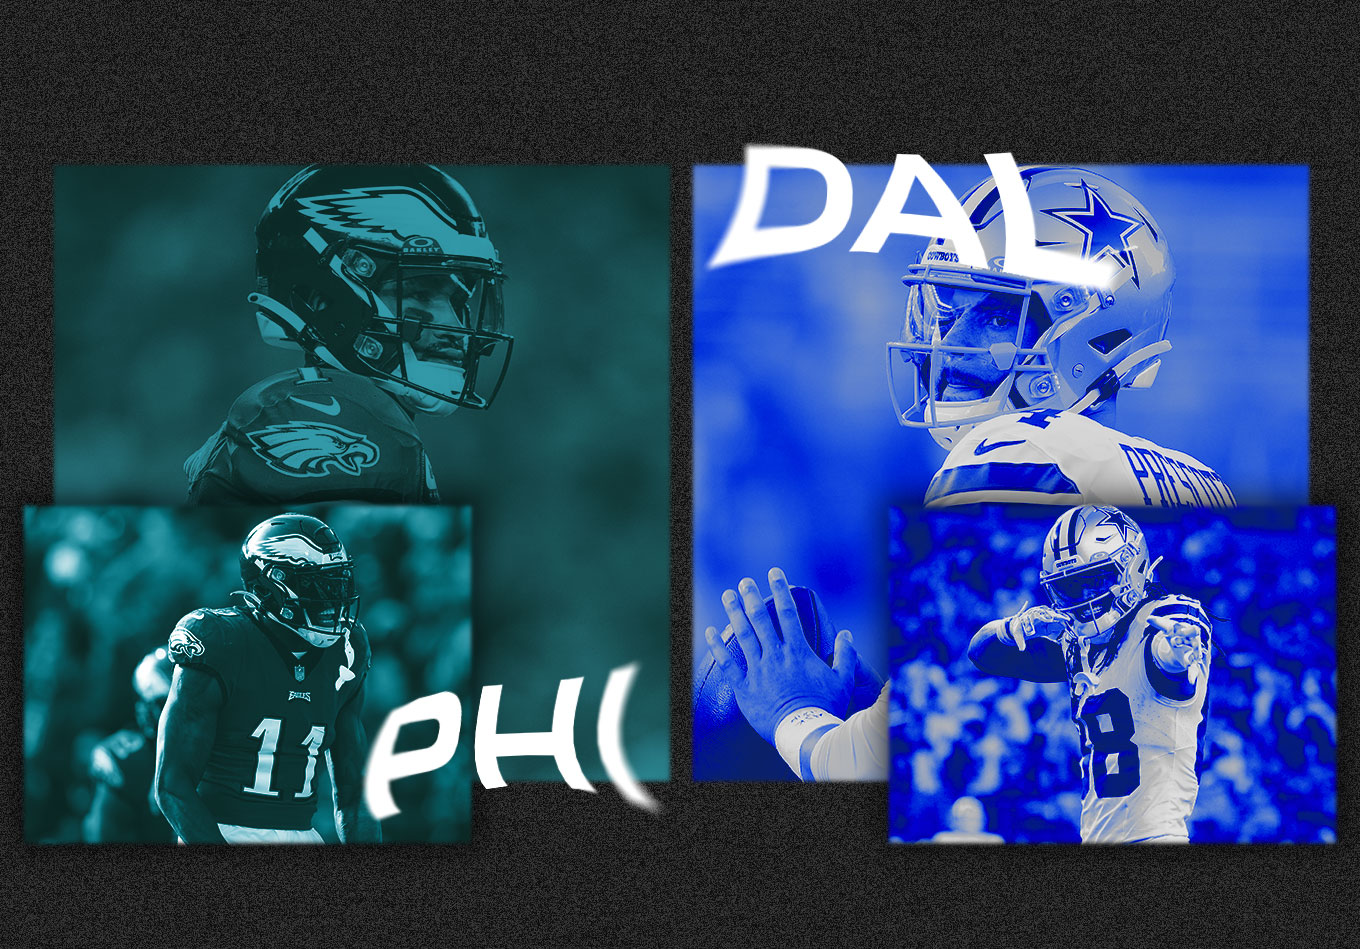 Eagles vs. Cowboys Prediction: Can Philly Bounce Back and End Dallas’ Home Dominance?